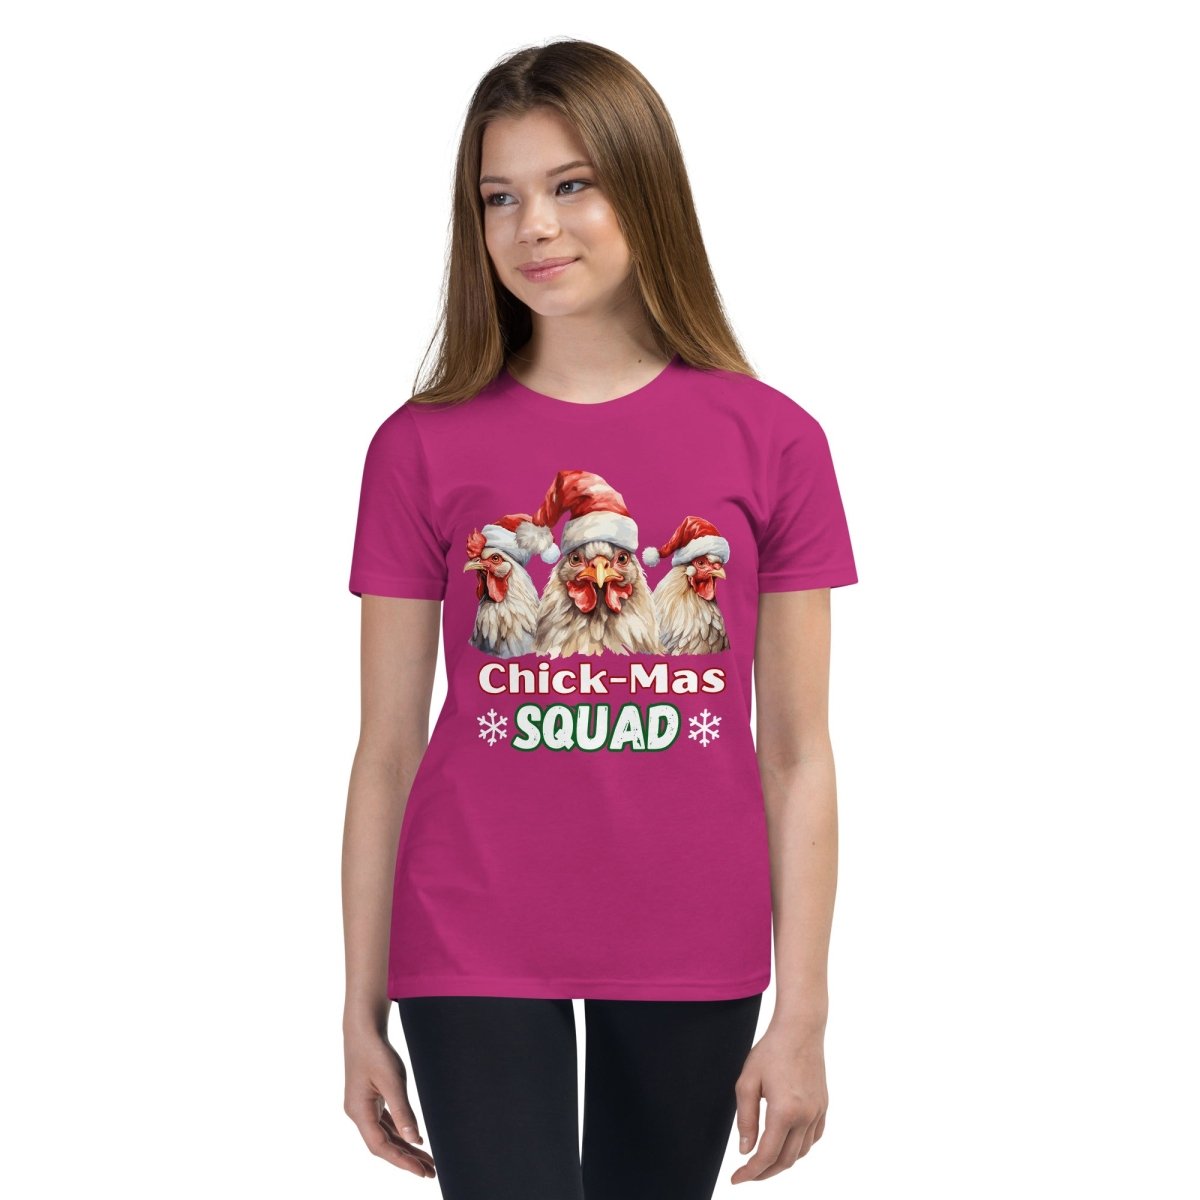 Christmas Chicken Squad T-Shirt - High Quality Festive Family Teenager T-Shirt, Gift for Chicken Lovers, Matching Holiday Tees, Youth Shirt - Everything Pixel